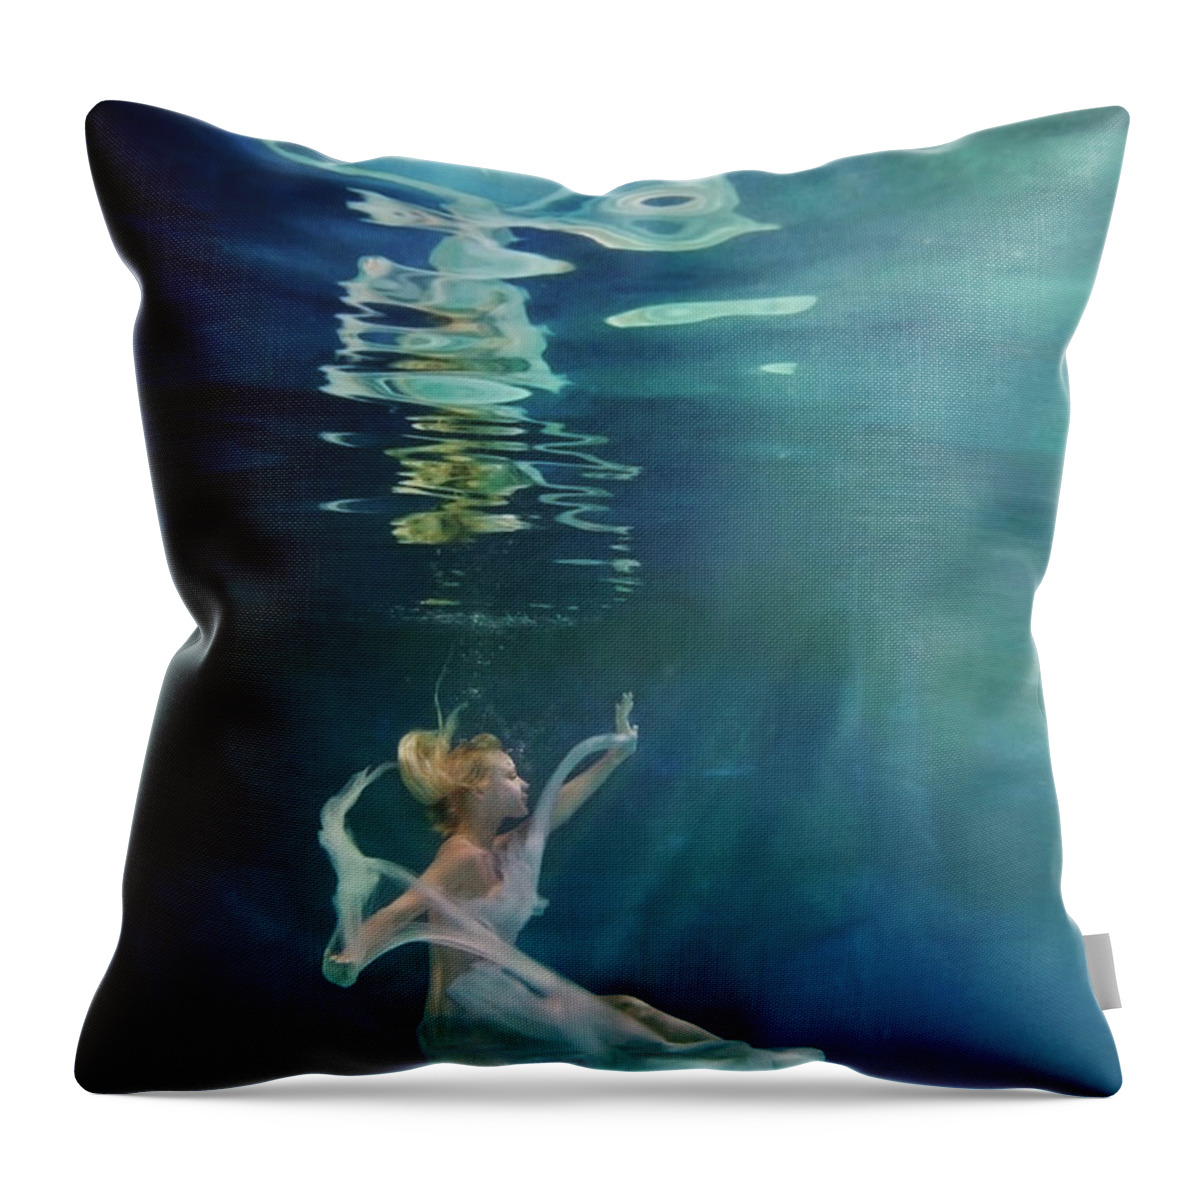 Tranquility Throw Pillow featuring the photograph Caucasian Woman In Dress Swimming Under #5 by Ming H2 Wu